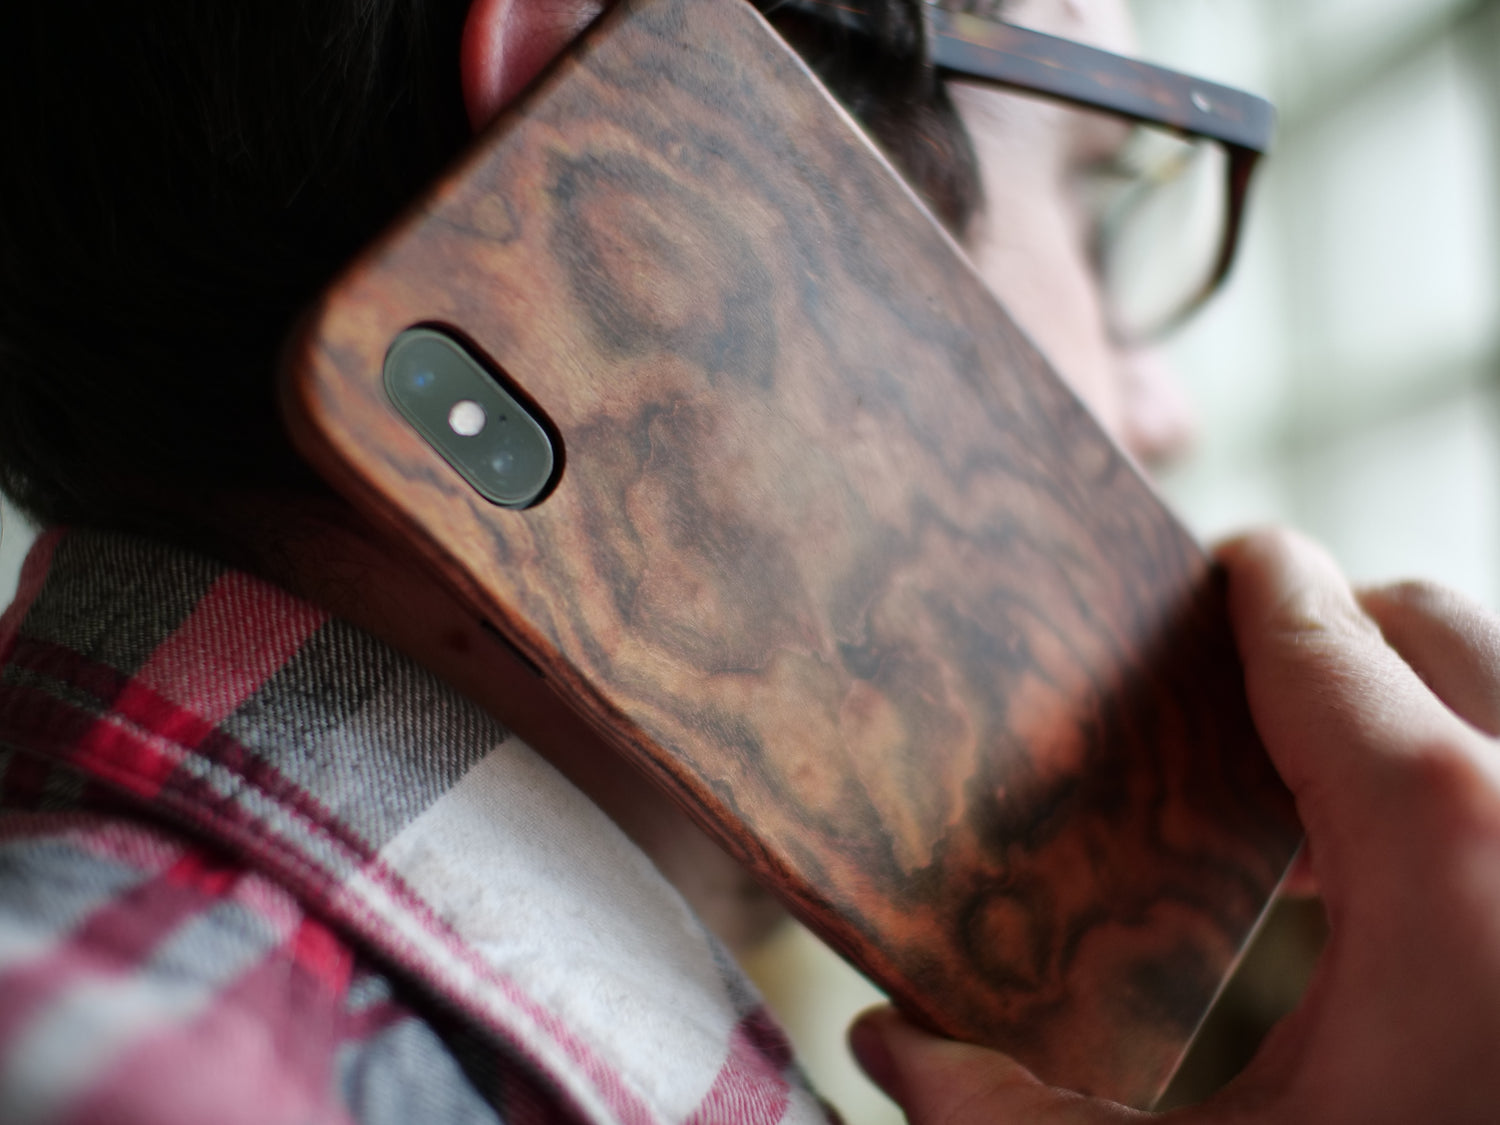 Wood Phone Cases - The Clear Winner